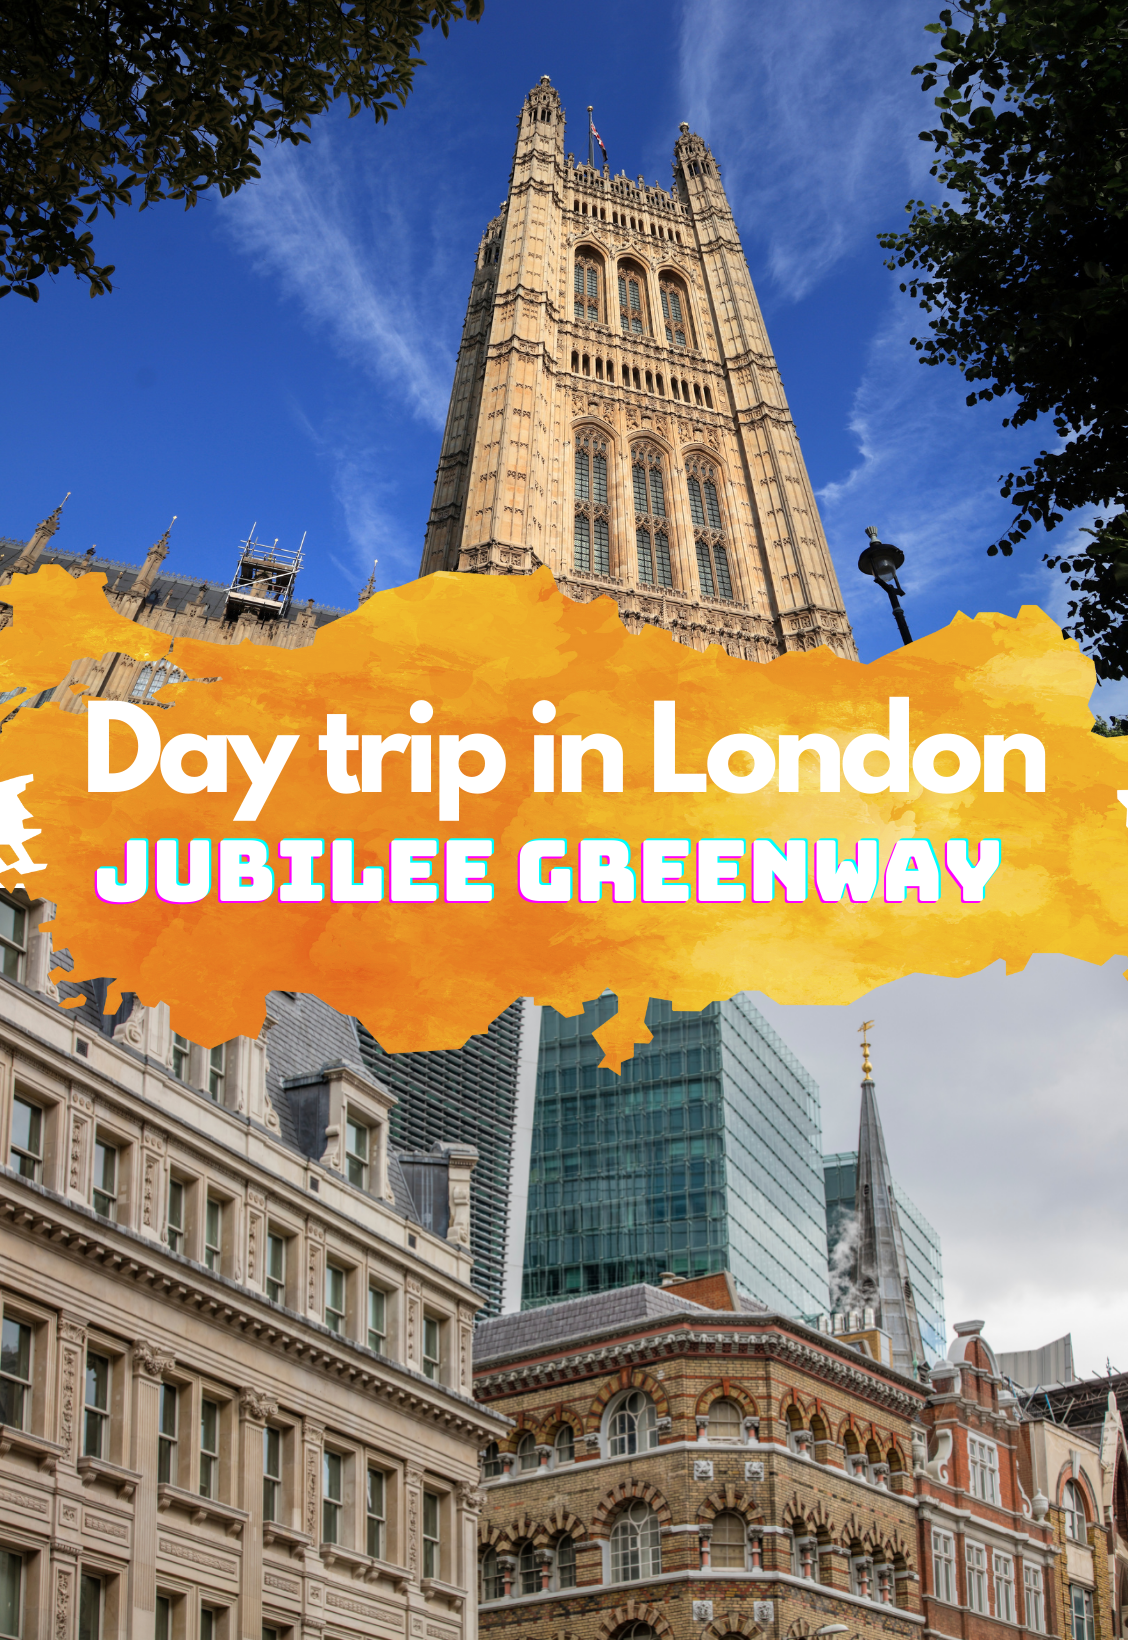 Day trip in London - A part of Jubilee Greenway